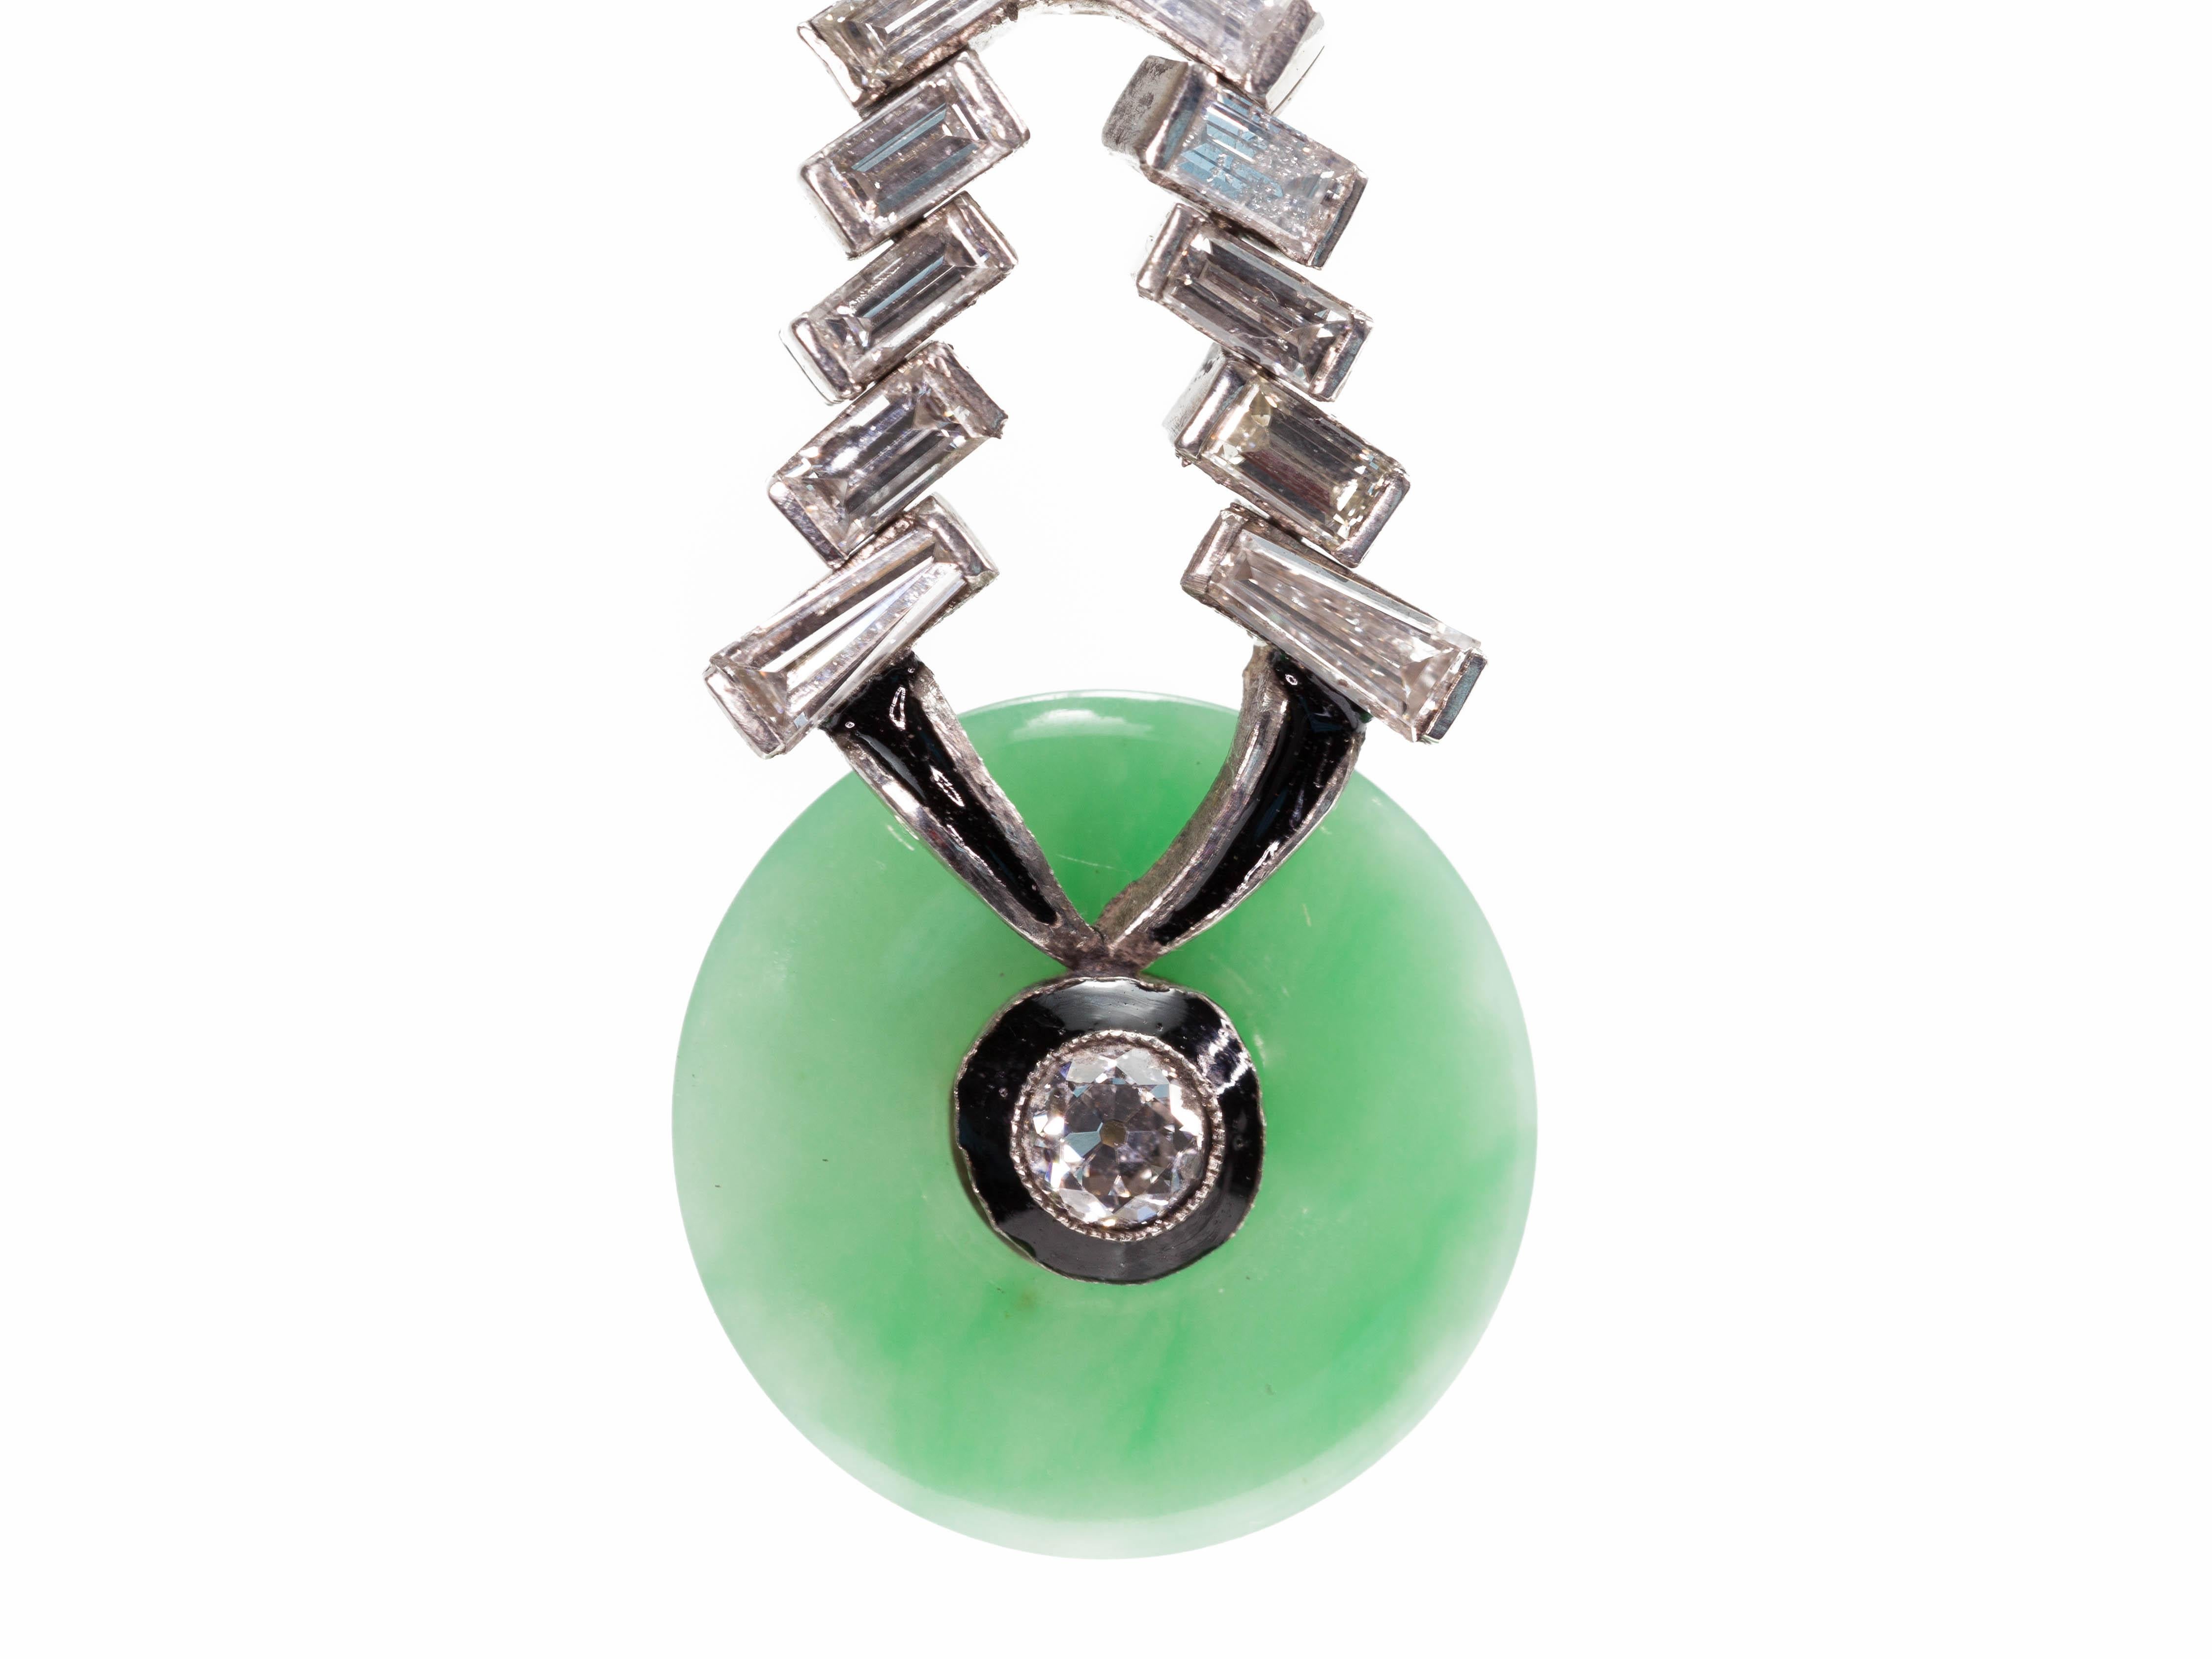 A pair of Italian mid-century natural jadeite Jade and Diamond dangling earrings set in platinum with black enamel accents, circa 1950. Handmade in Italy, this vintage pair of dangling earrings each features a 15.5mm apple green natural jadeite Jade